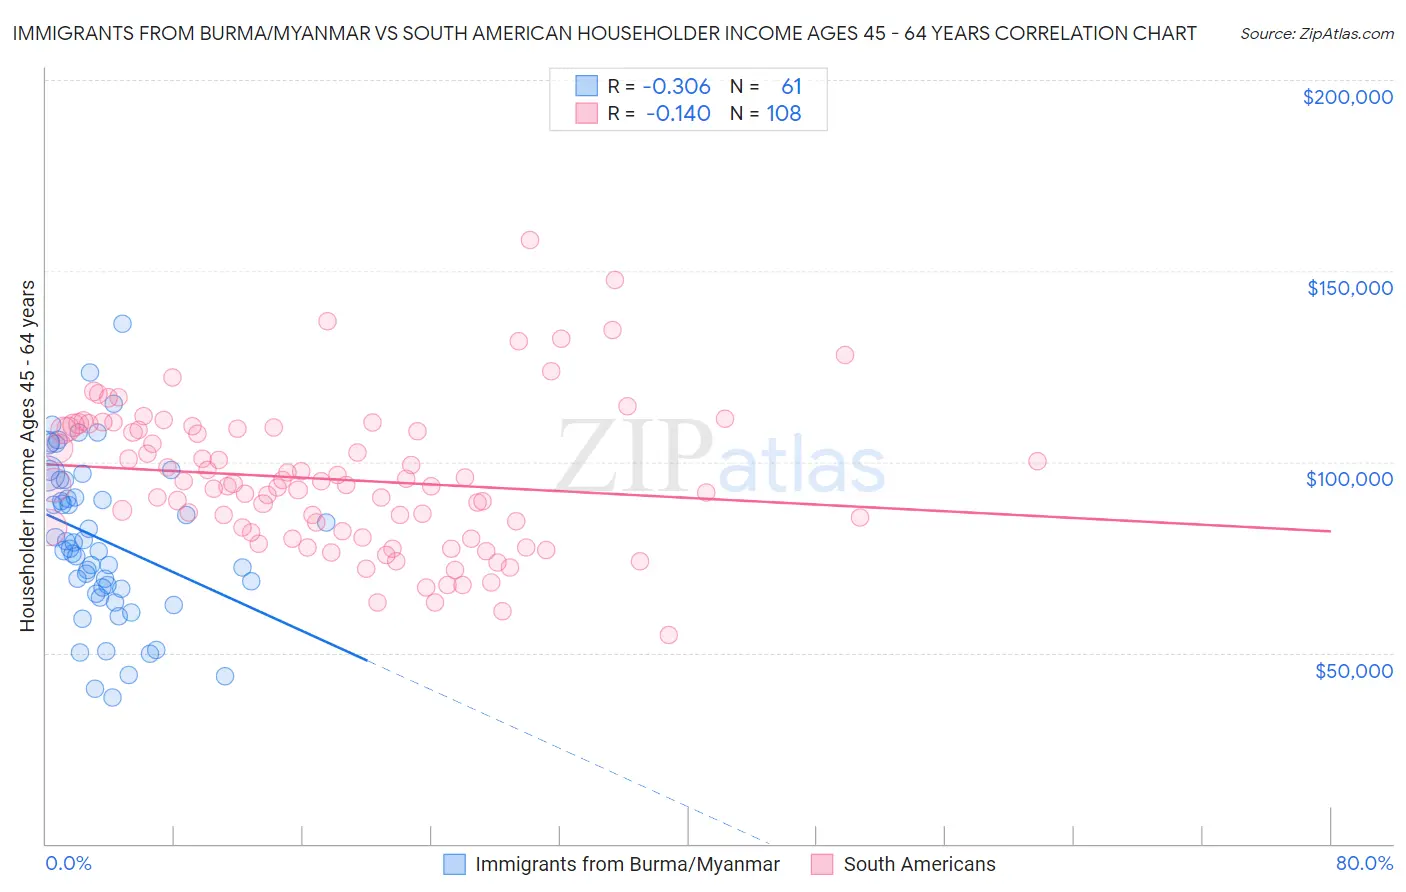 Immigrants from Burma/Myanmar vs South American Householder Income Ages 45 - 64 years